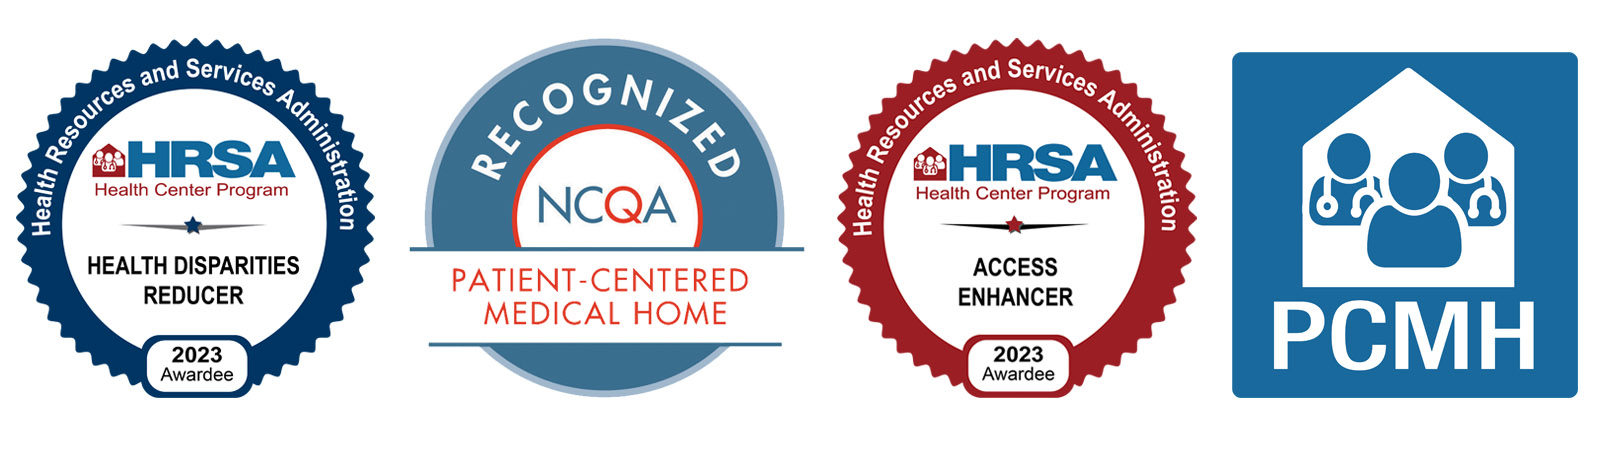 Laurel Health's Official National Healthcare Quality Award Badges, including Access Enhancer, Patient-Centered Medical Home (PCMH), and Healthcare Disparities Reducer recognitions by HRSA and the National Committee for Quality Assurance